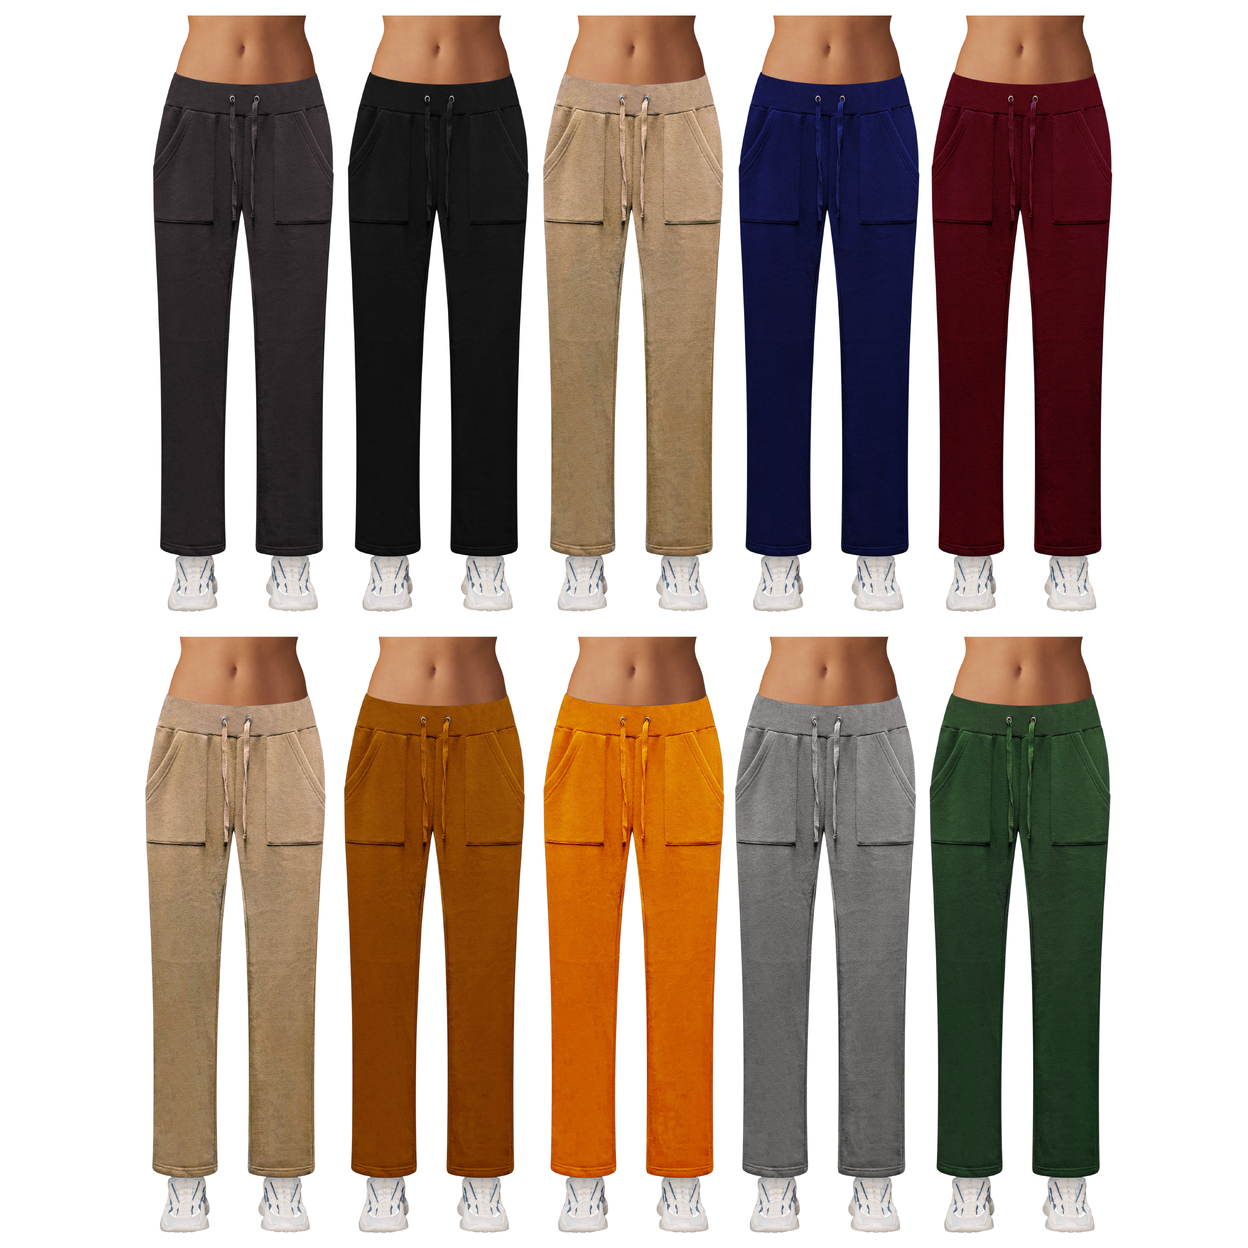 Women's Ultra Soft Cozy Fleece Lined Elastic Waistband Terry Knit Pants - Assorted, Large